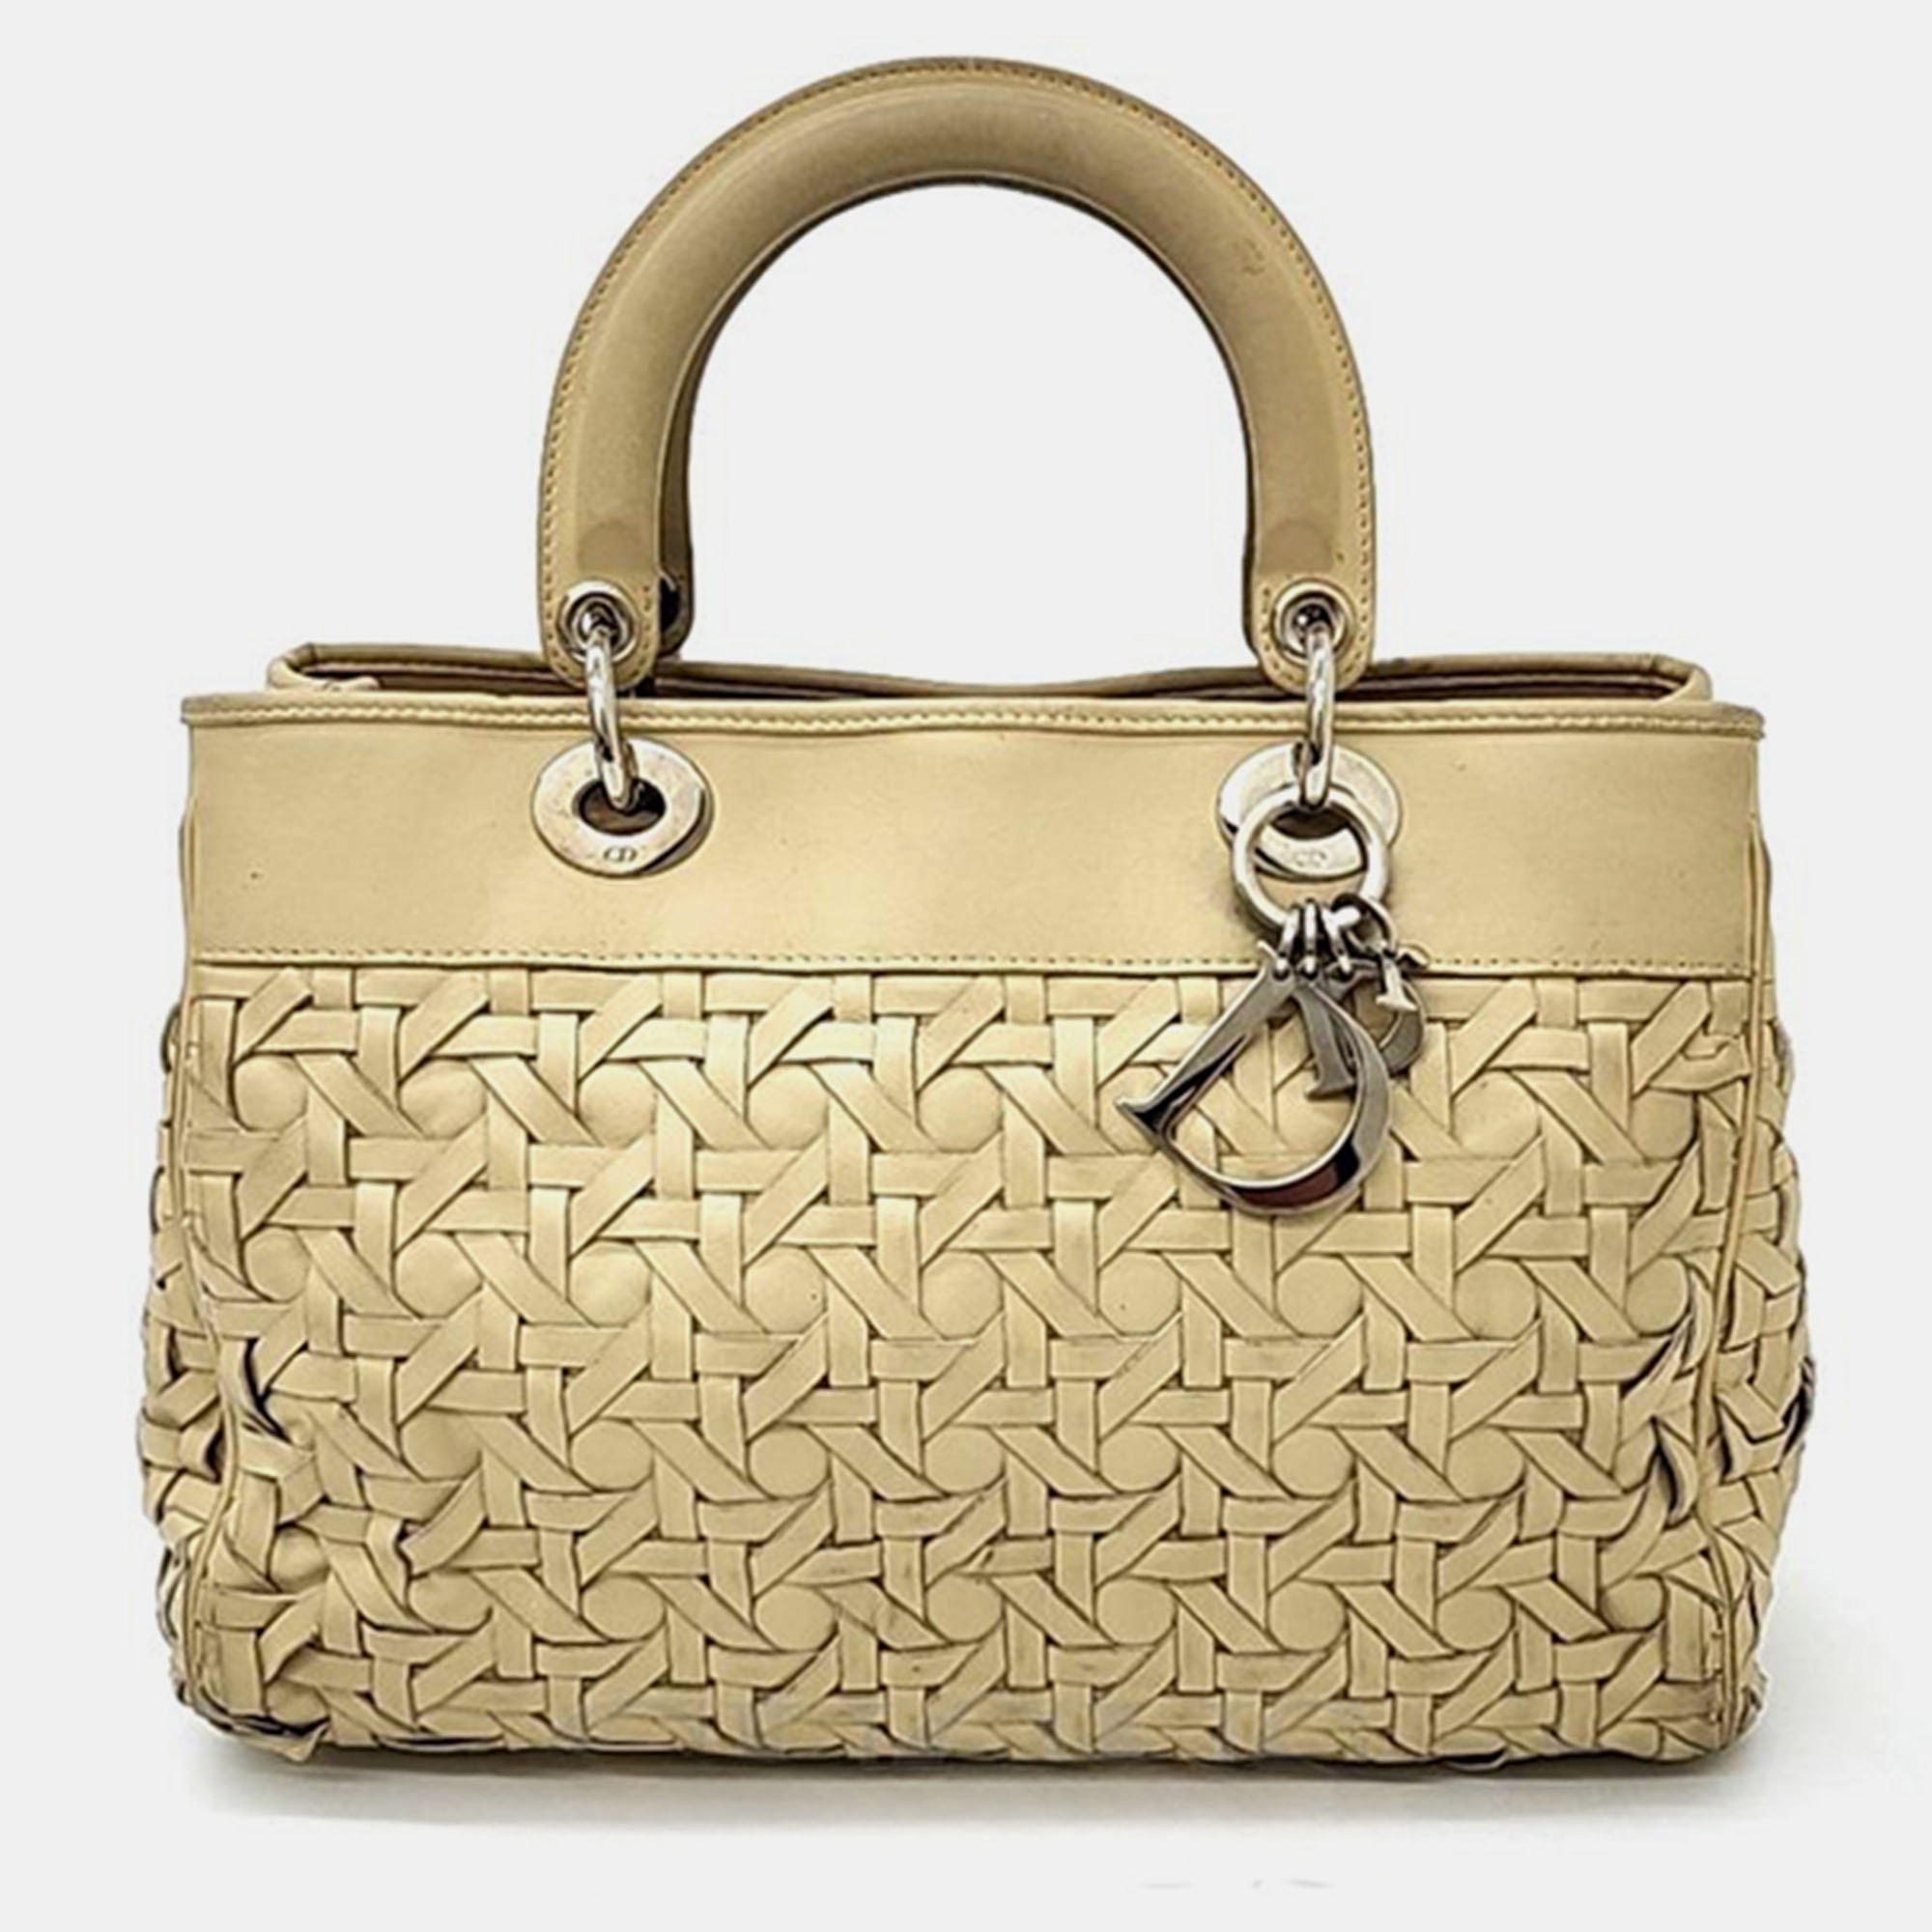 Christian dior beige woven leather cannage tote bag